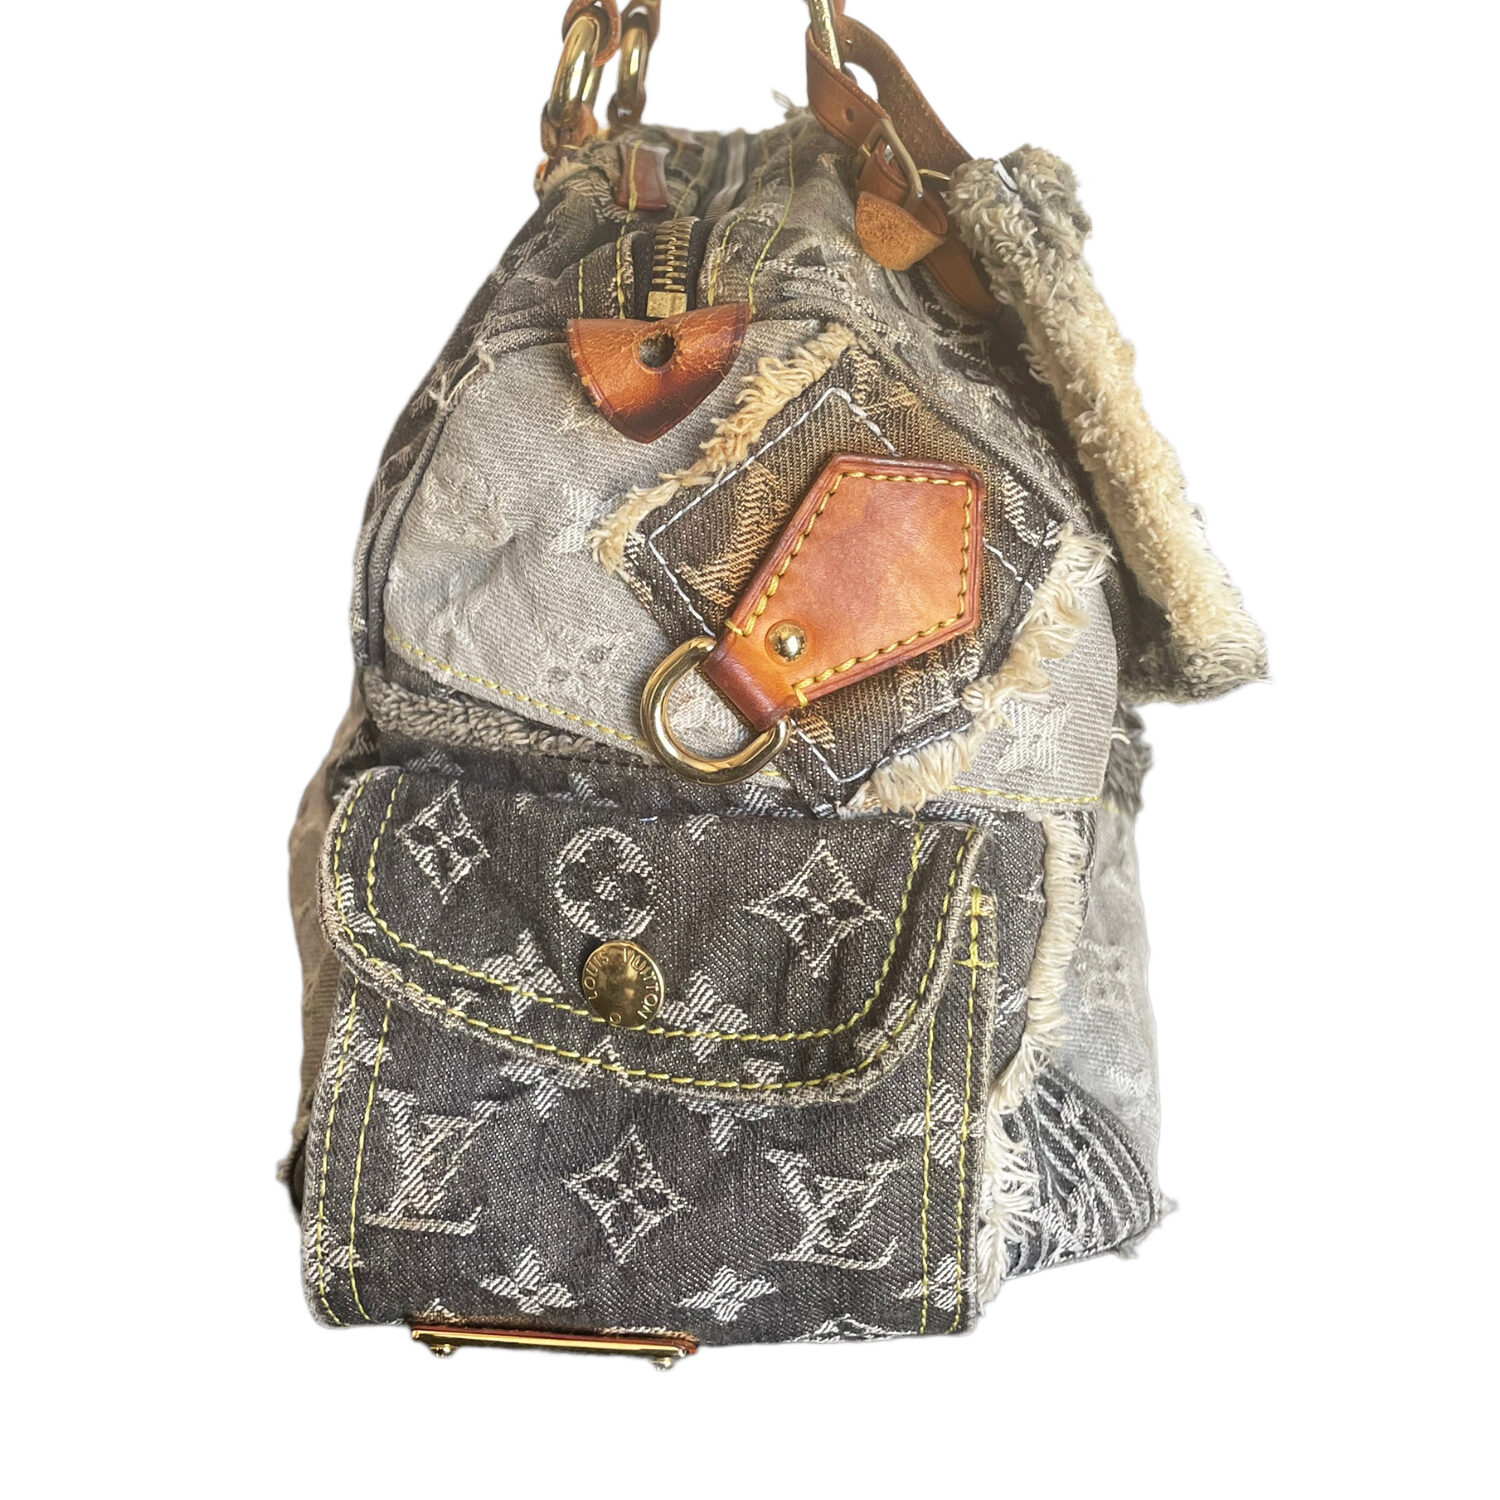 Louis Vuitton Speedy Patchwork Denim (2007) Reference Guide – Bagaholic